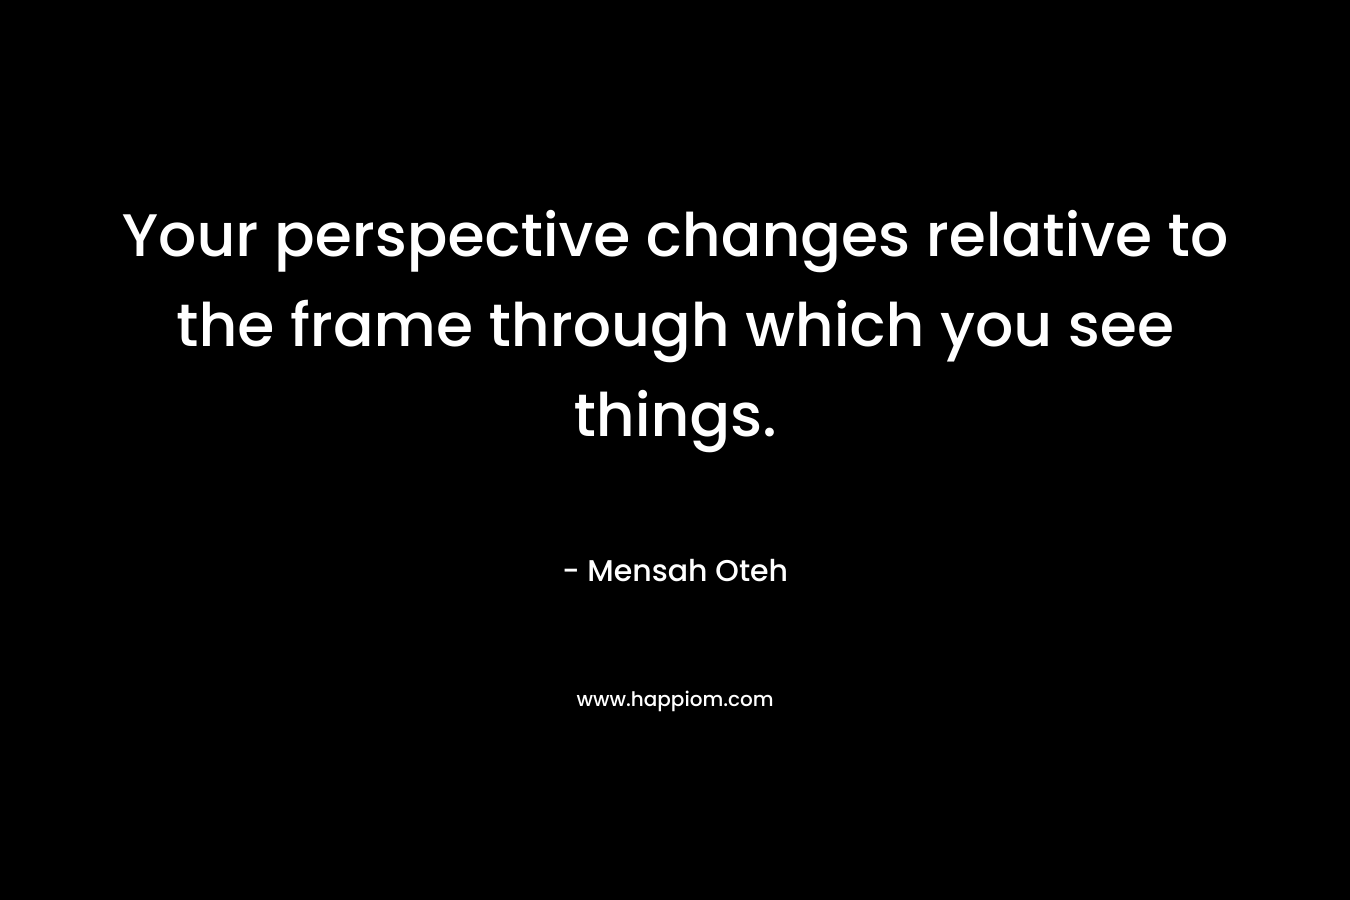 Your perspective changes relative to the frame through which you see things.